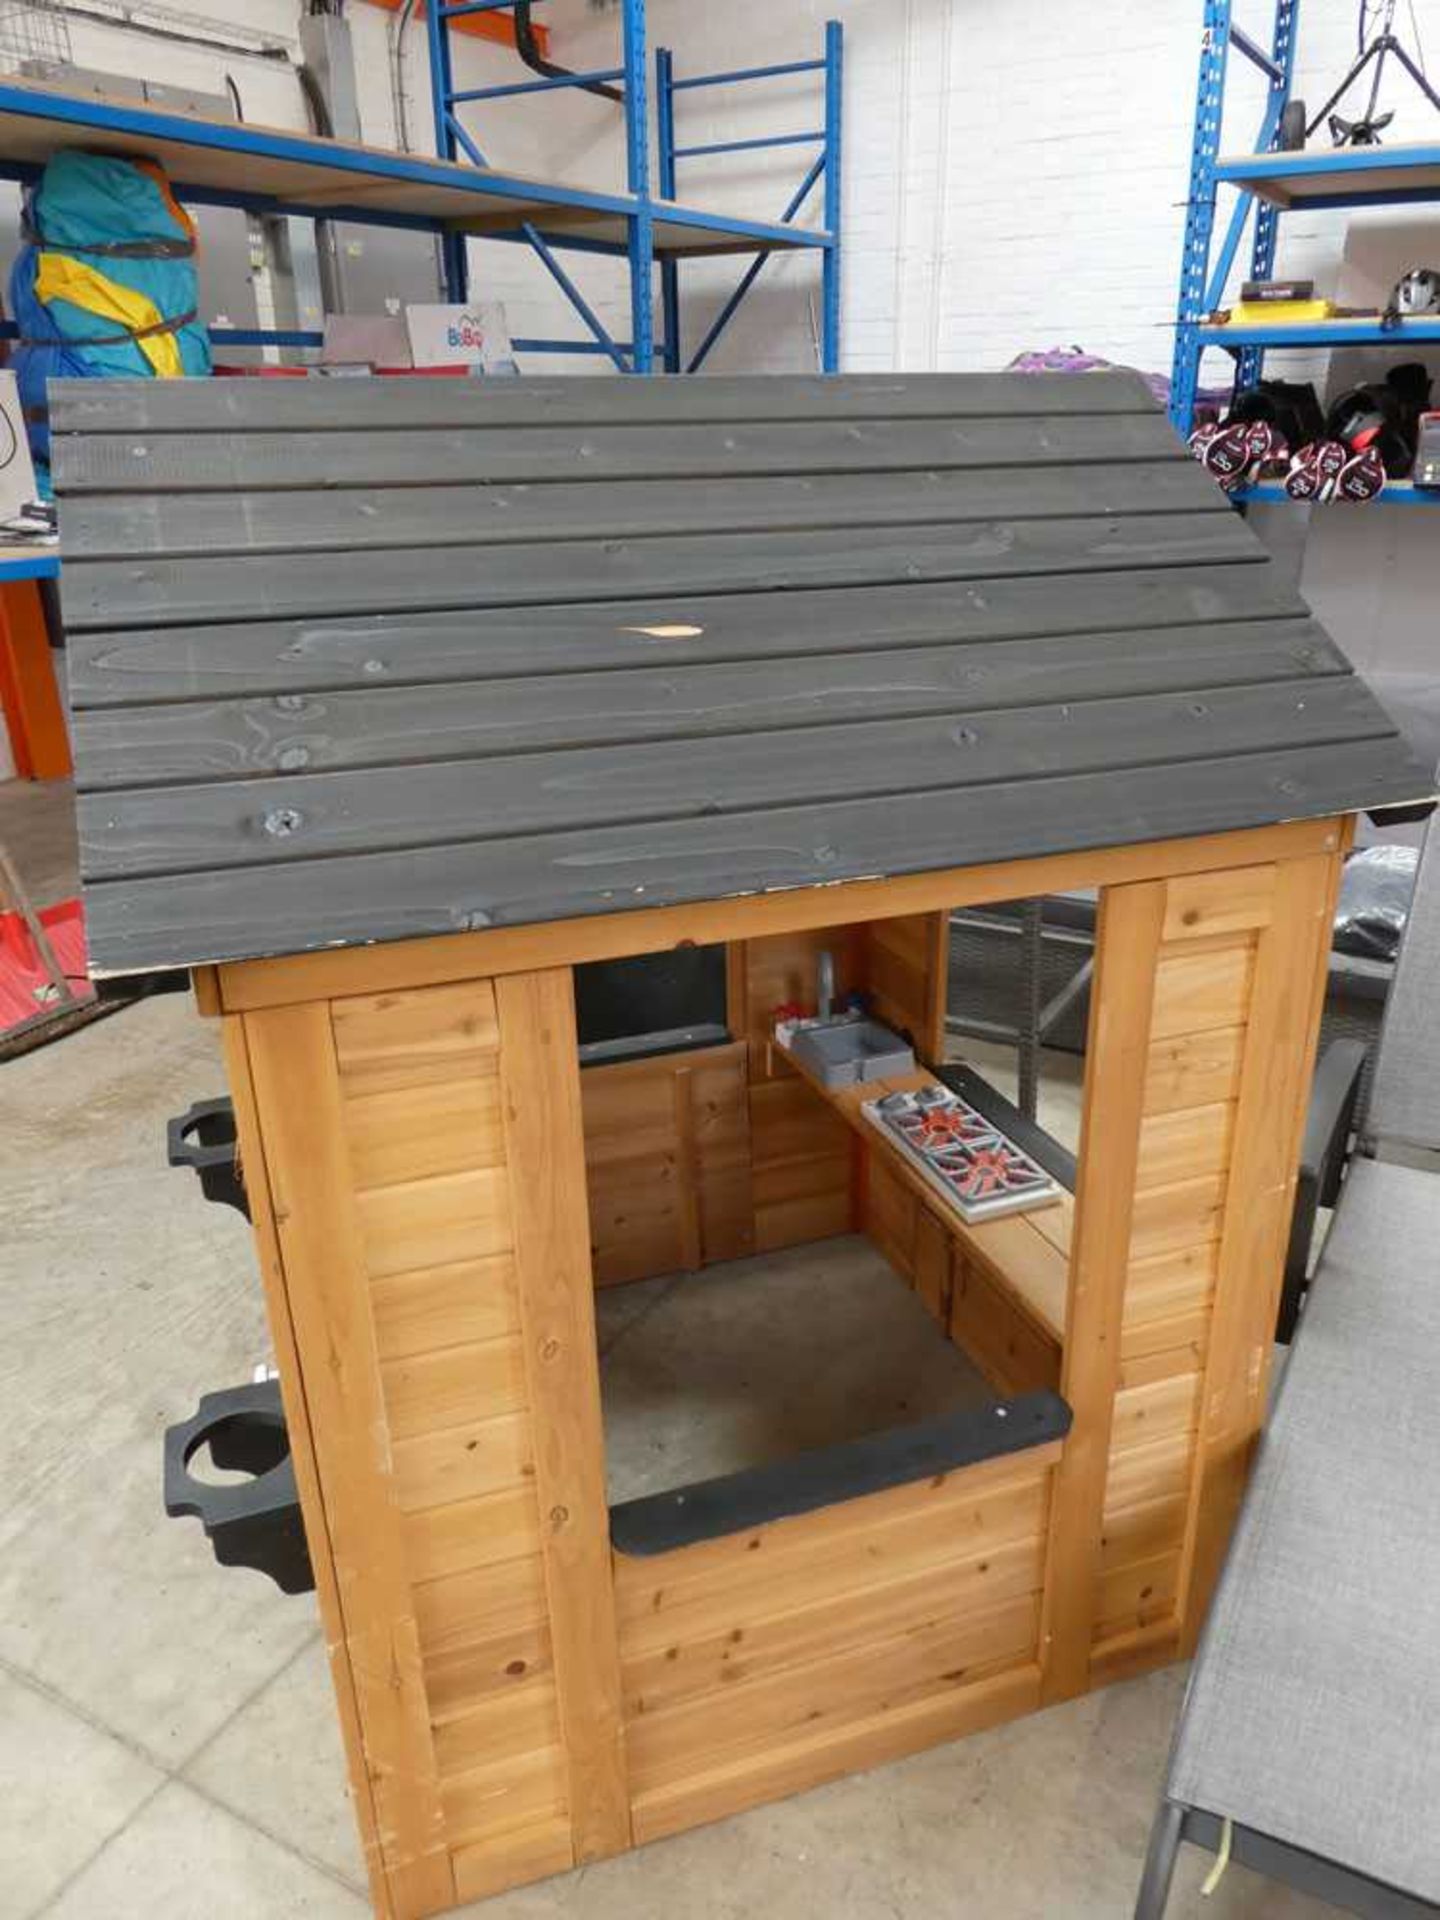 +VAT Wooden outdoor childs playhouse - Image 3 of 3